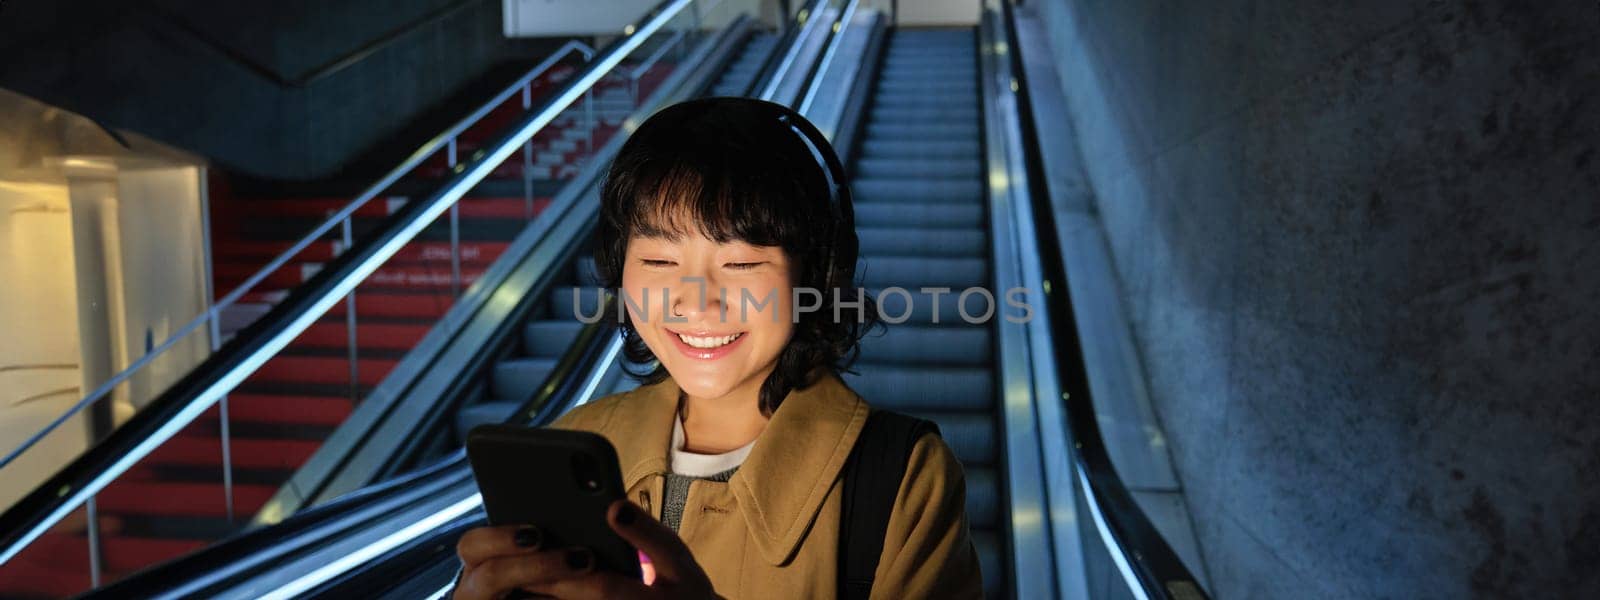 Portrait of girl student in headphones, listens music, commutes, goes down escalator, looks at smartphone with pleased smile, happy face.